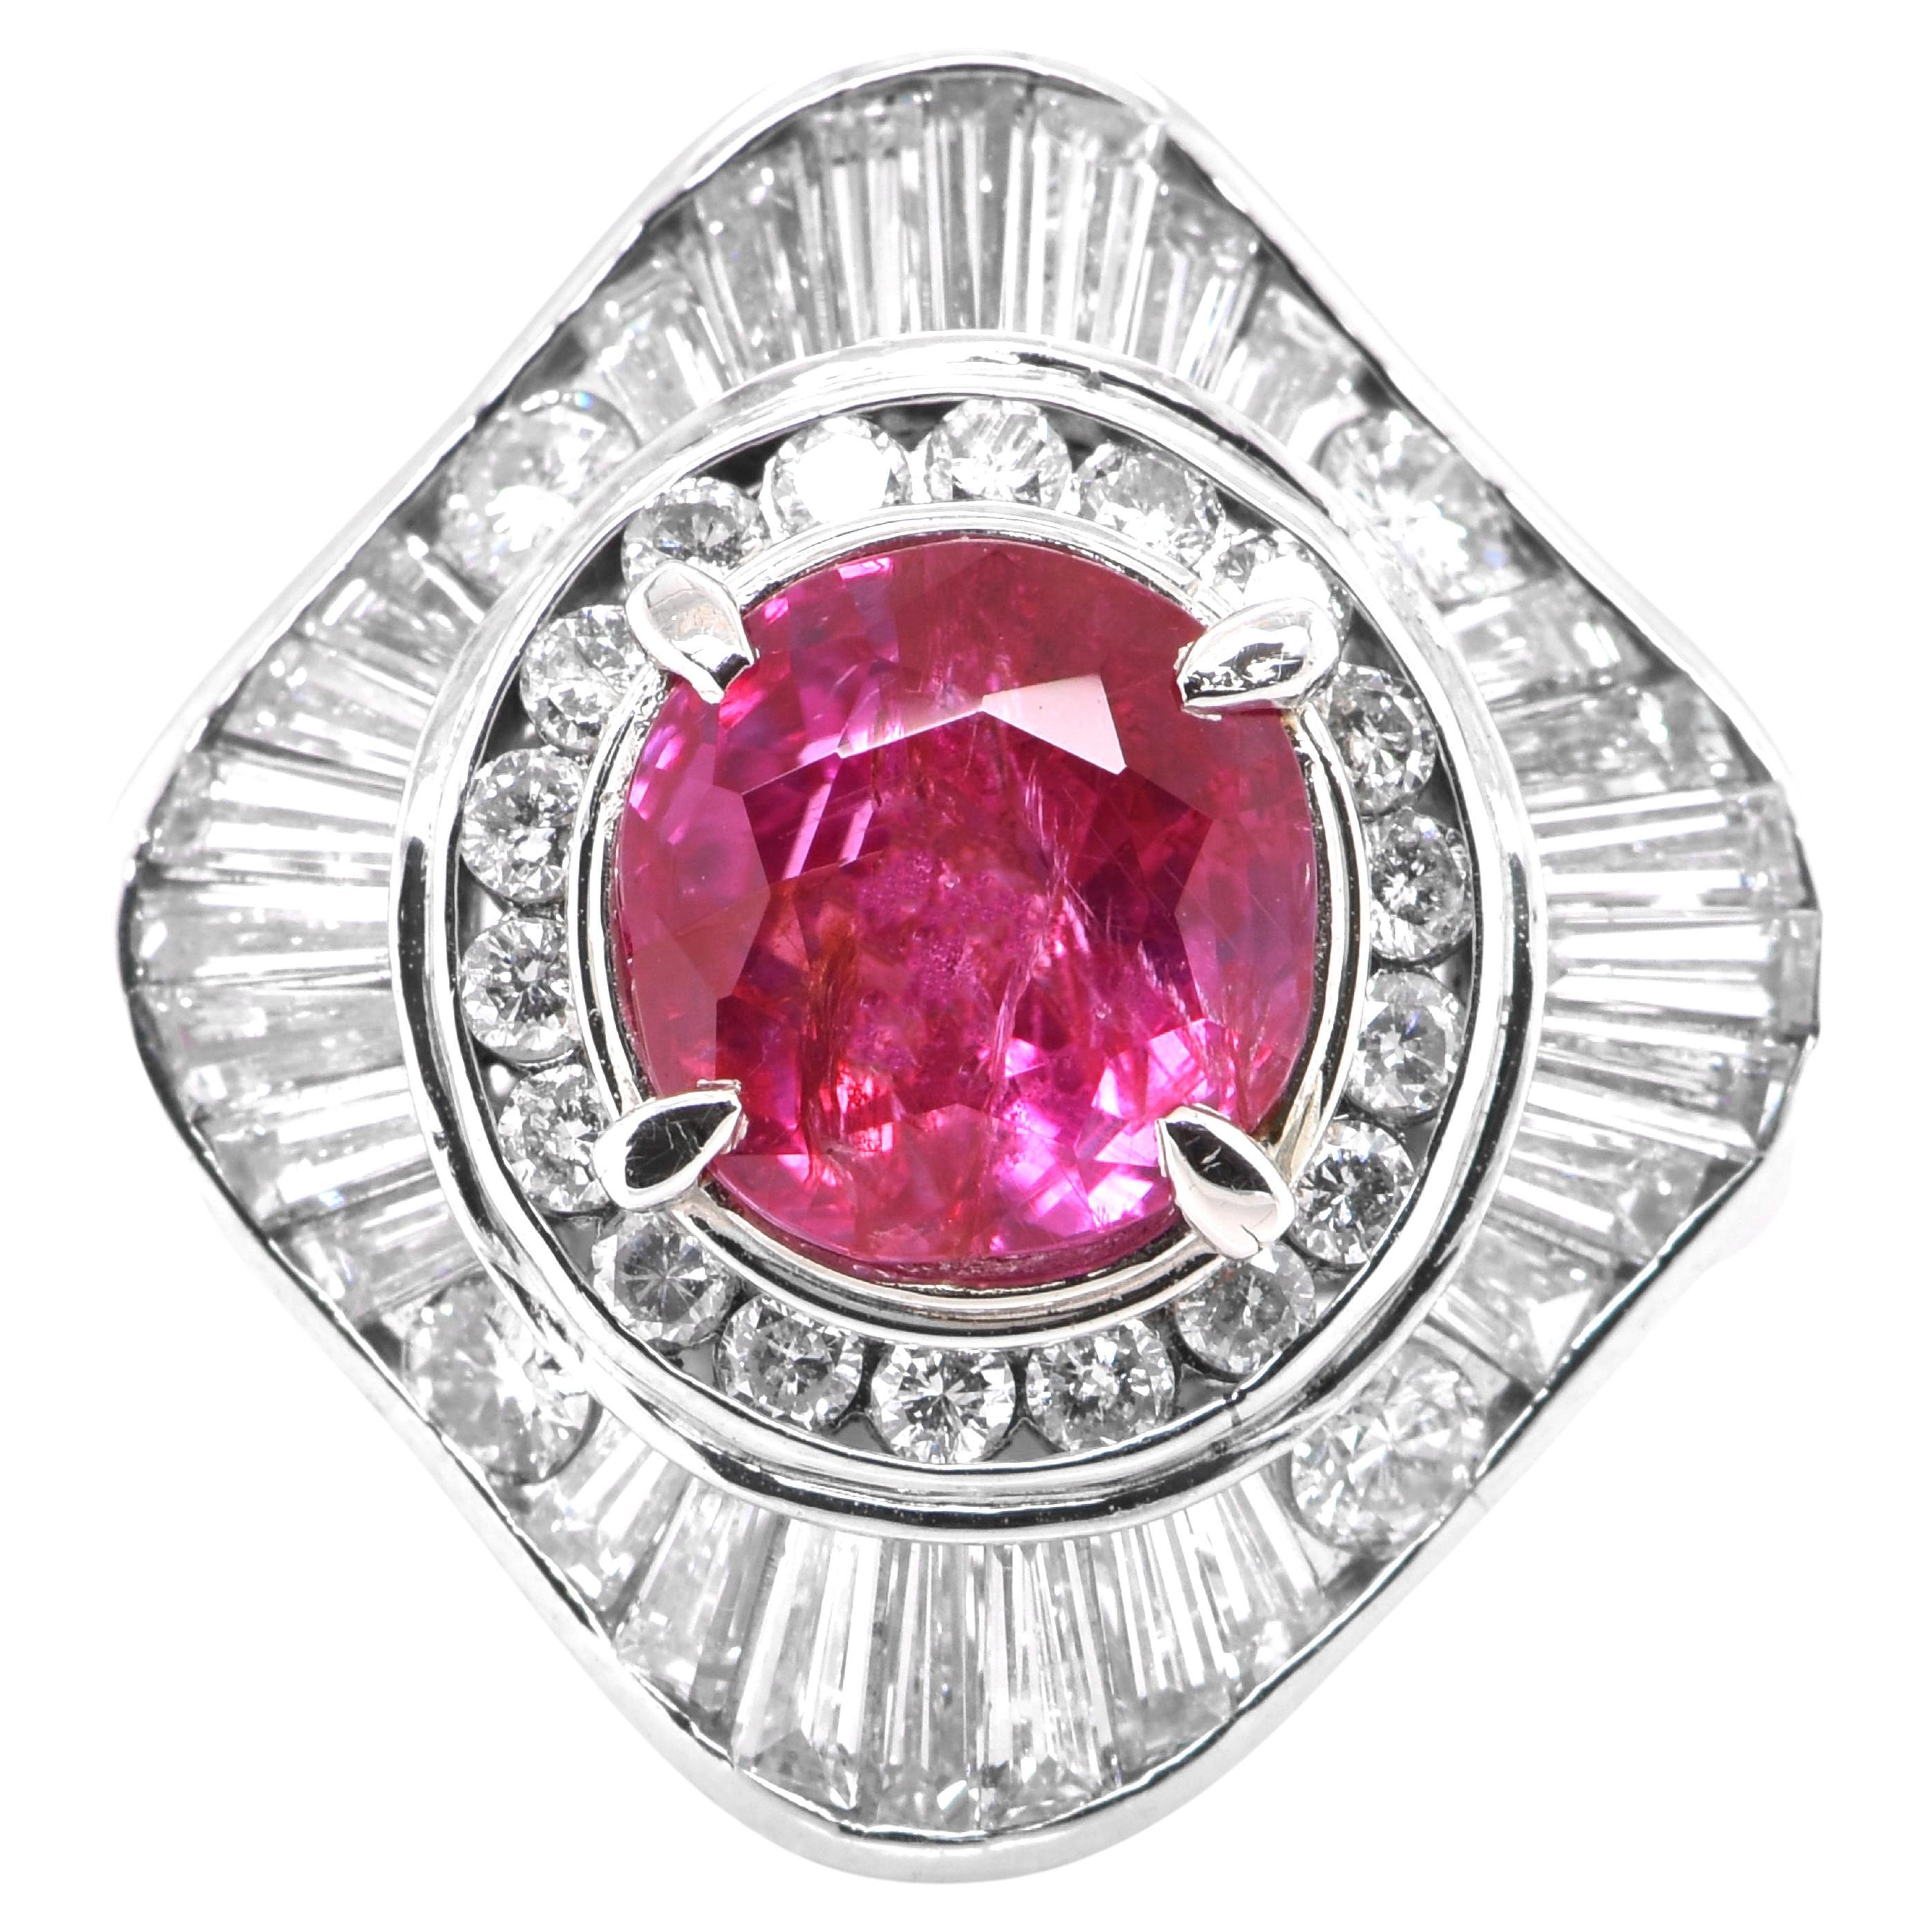 Vintage 3.32 Carat Natural Ruby and Diamond Ring Set in Platinum For Sale